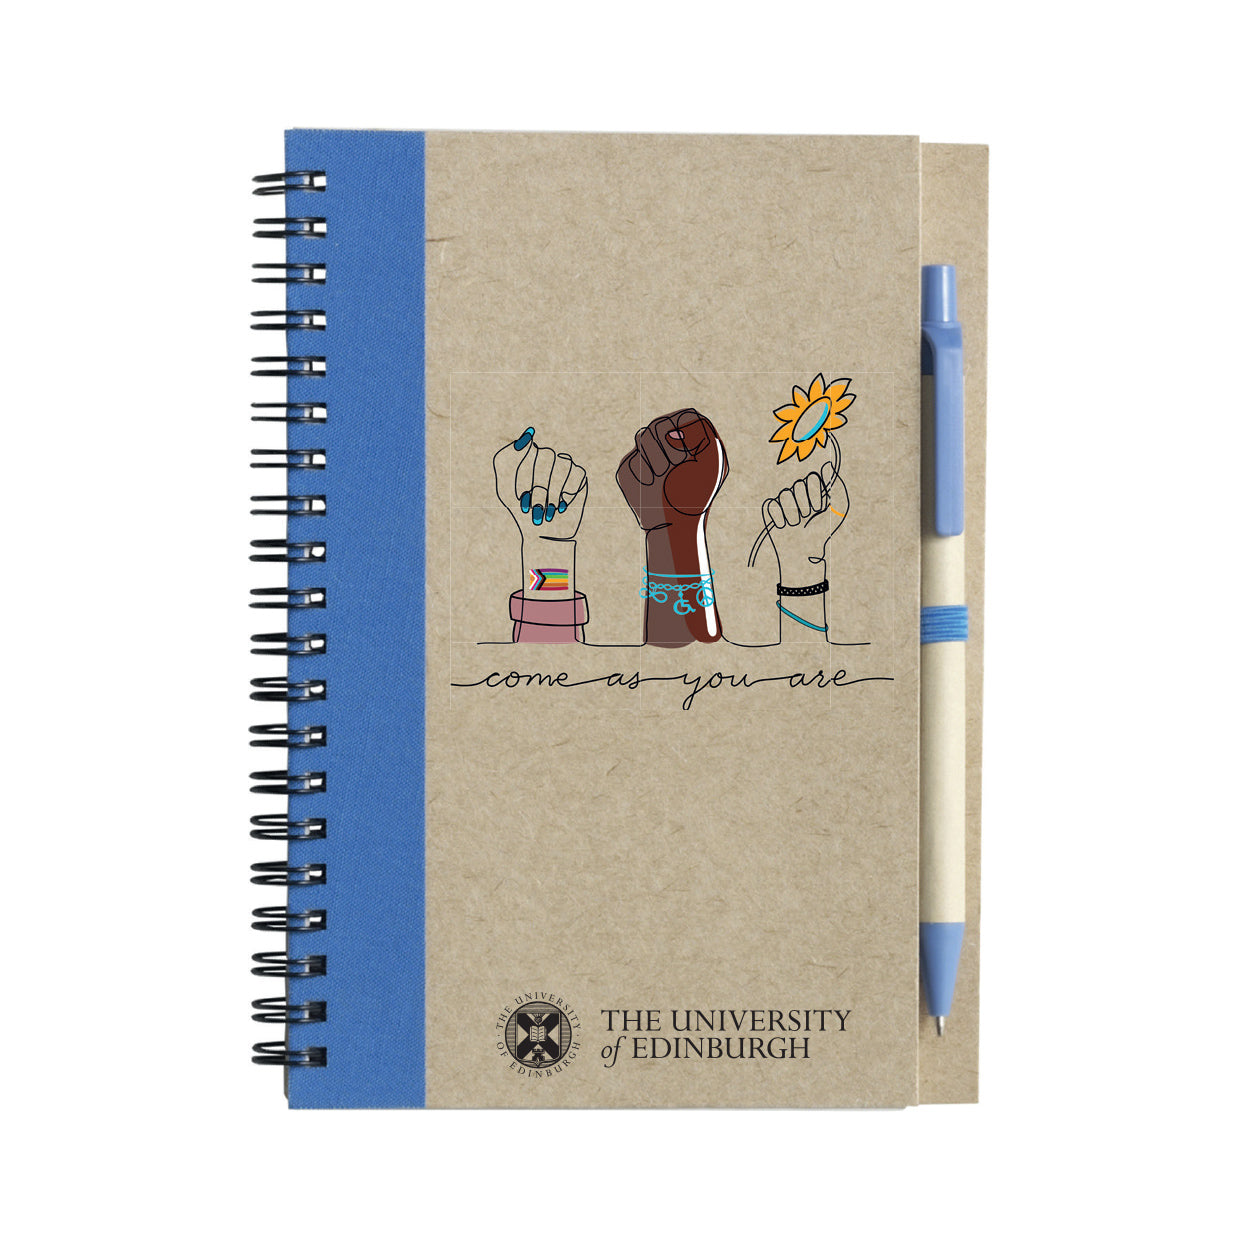 Come As You Are Notebook with Blue band.